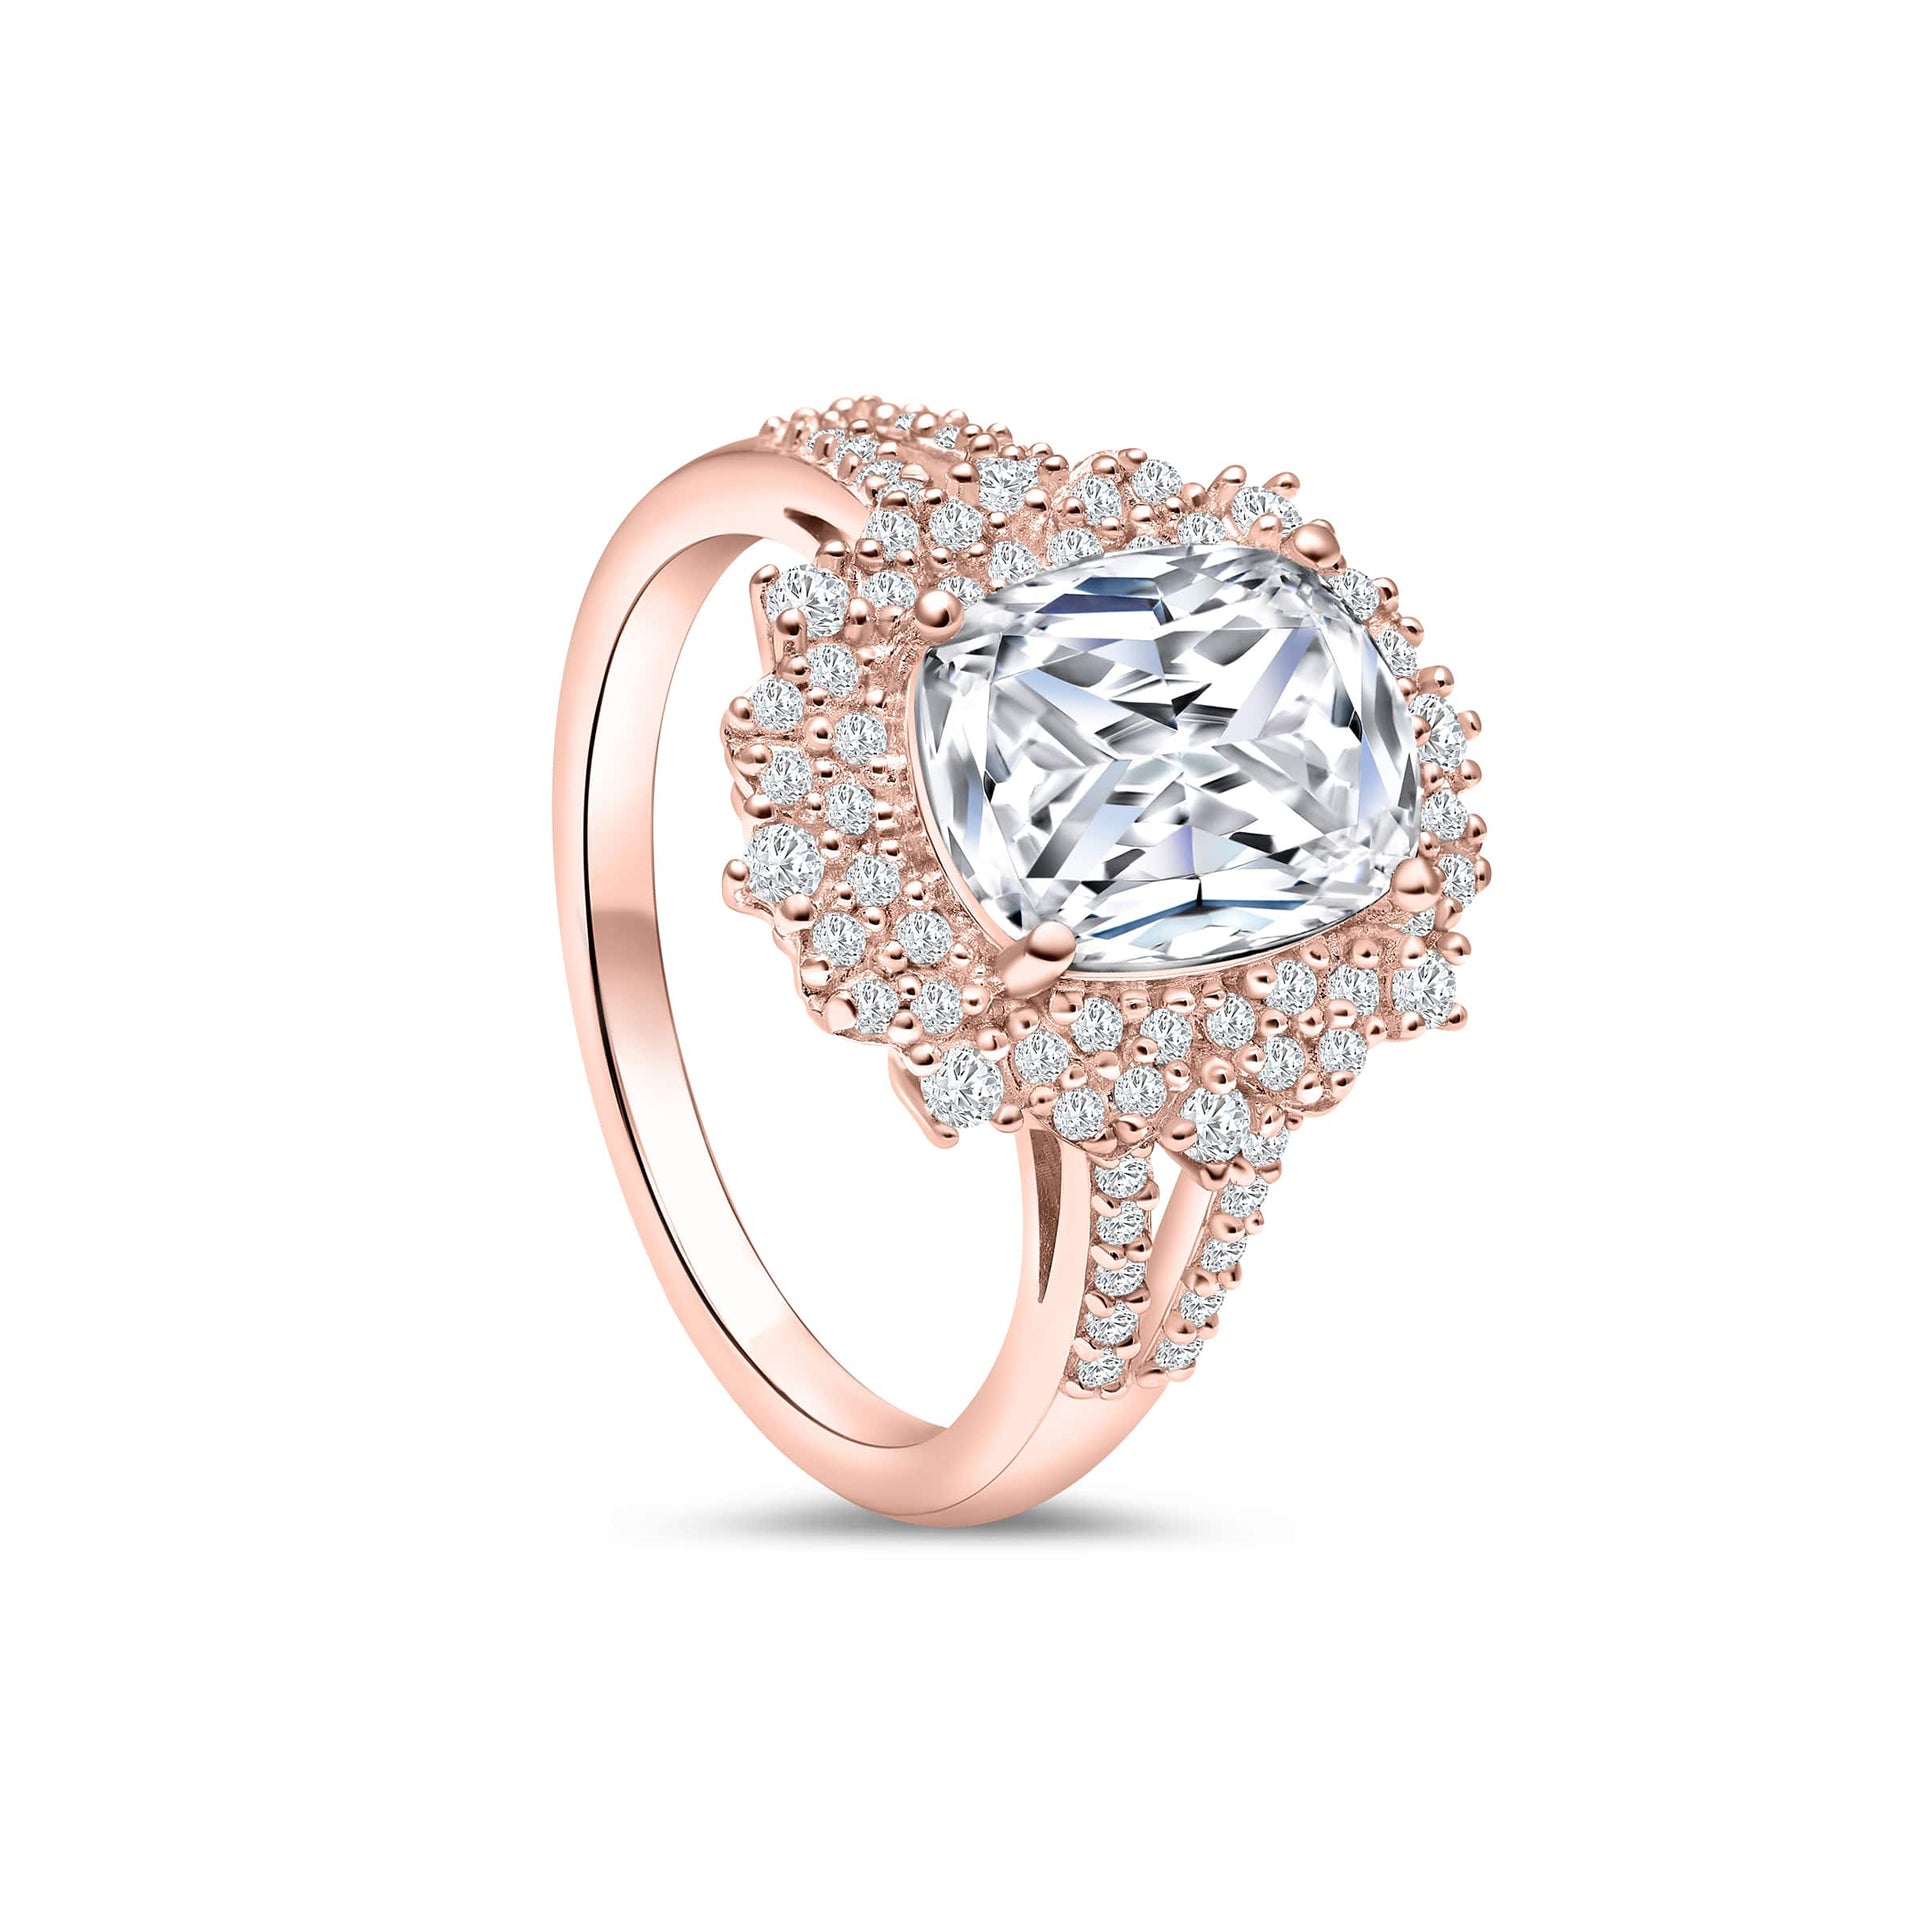 tilted engagement ring showing beautiful 2.5 ct cushion cut engagement ring in rose gold